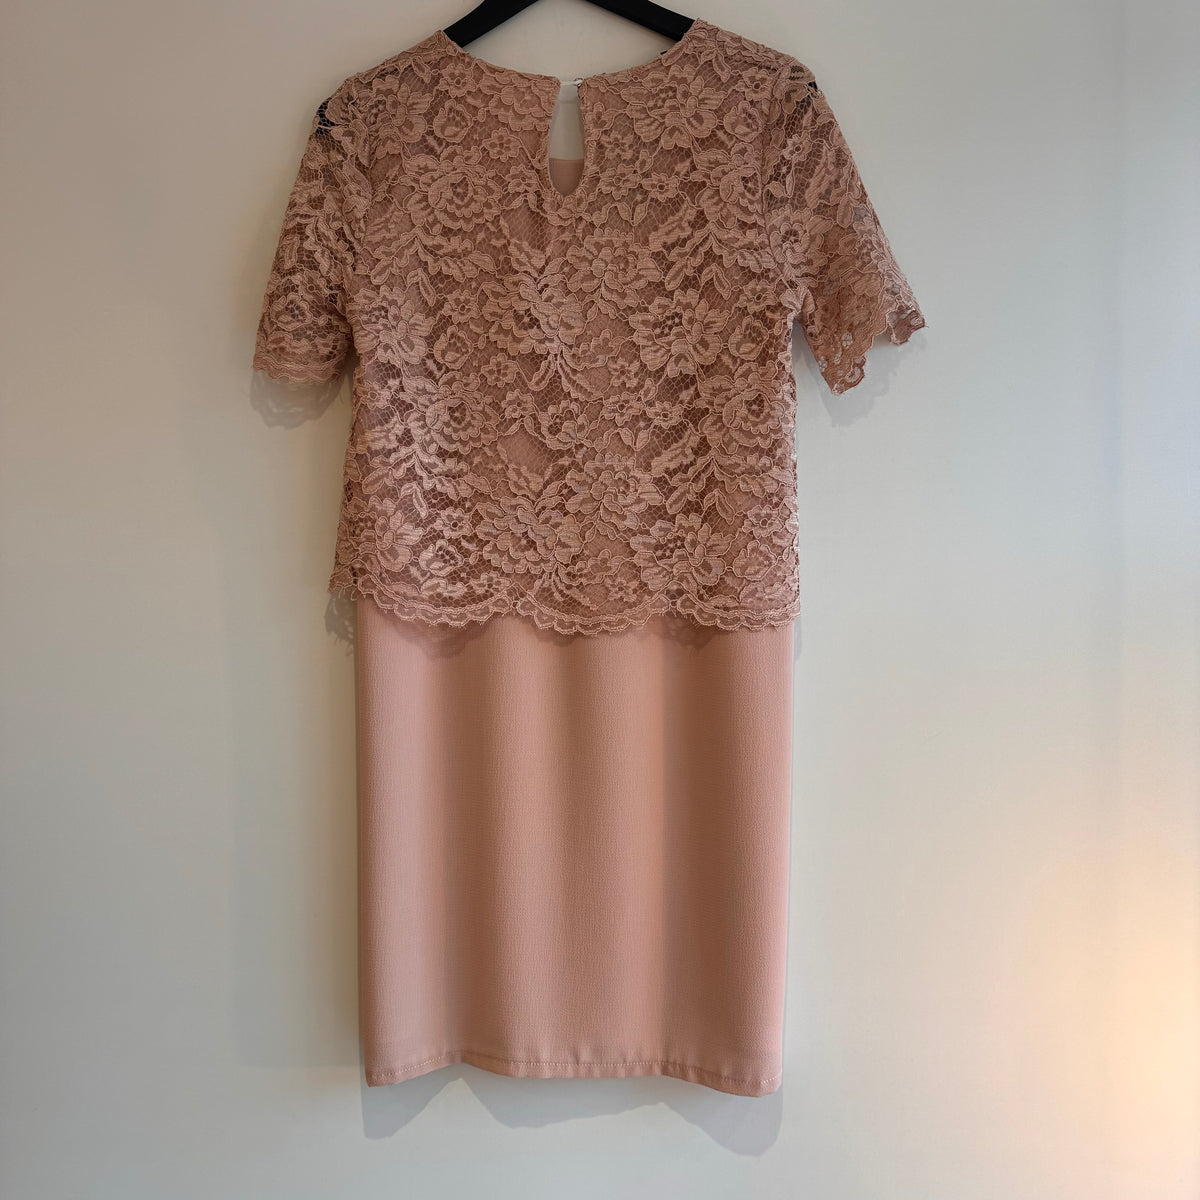 Le Streghe lacey occasion dress Blush Size small